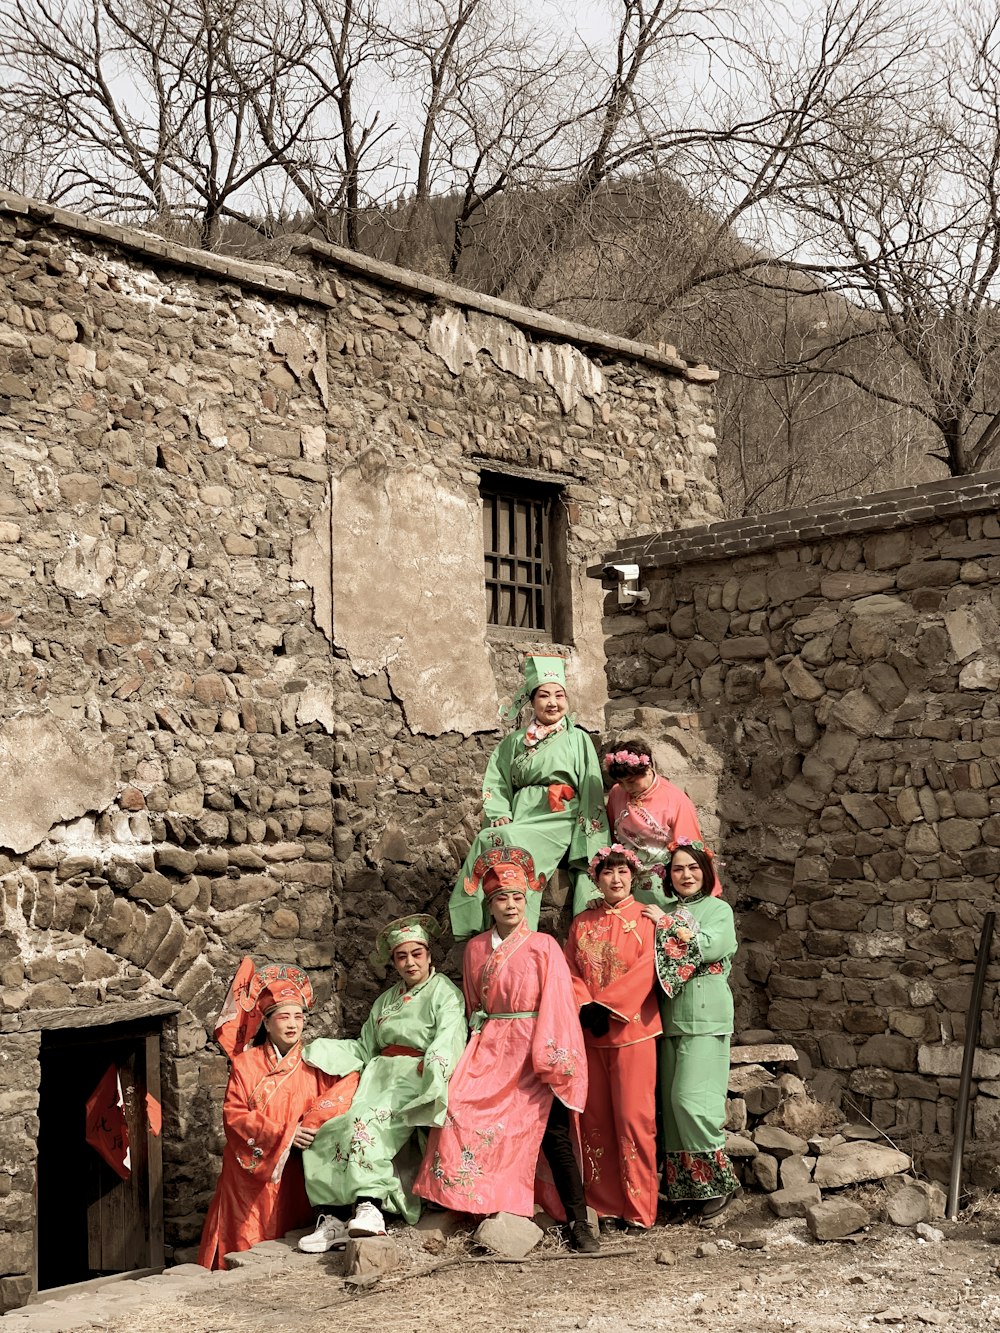 people in green and orange traditional dress standing near brown brick wall during daytime